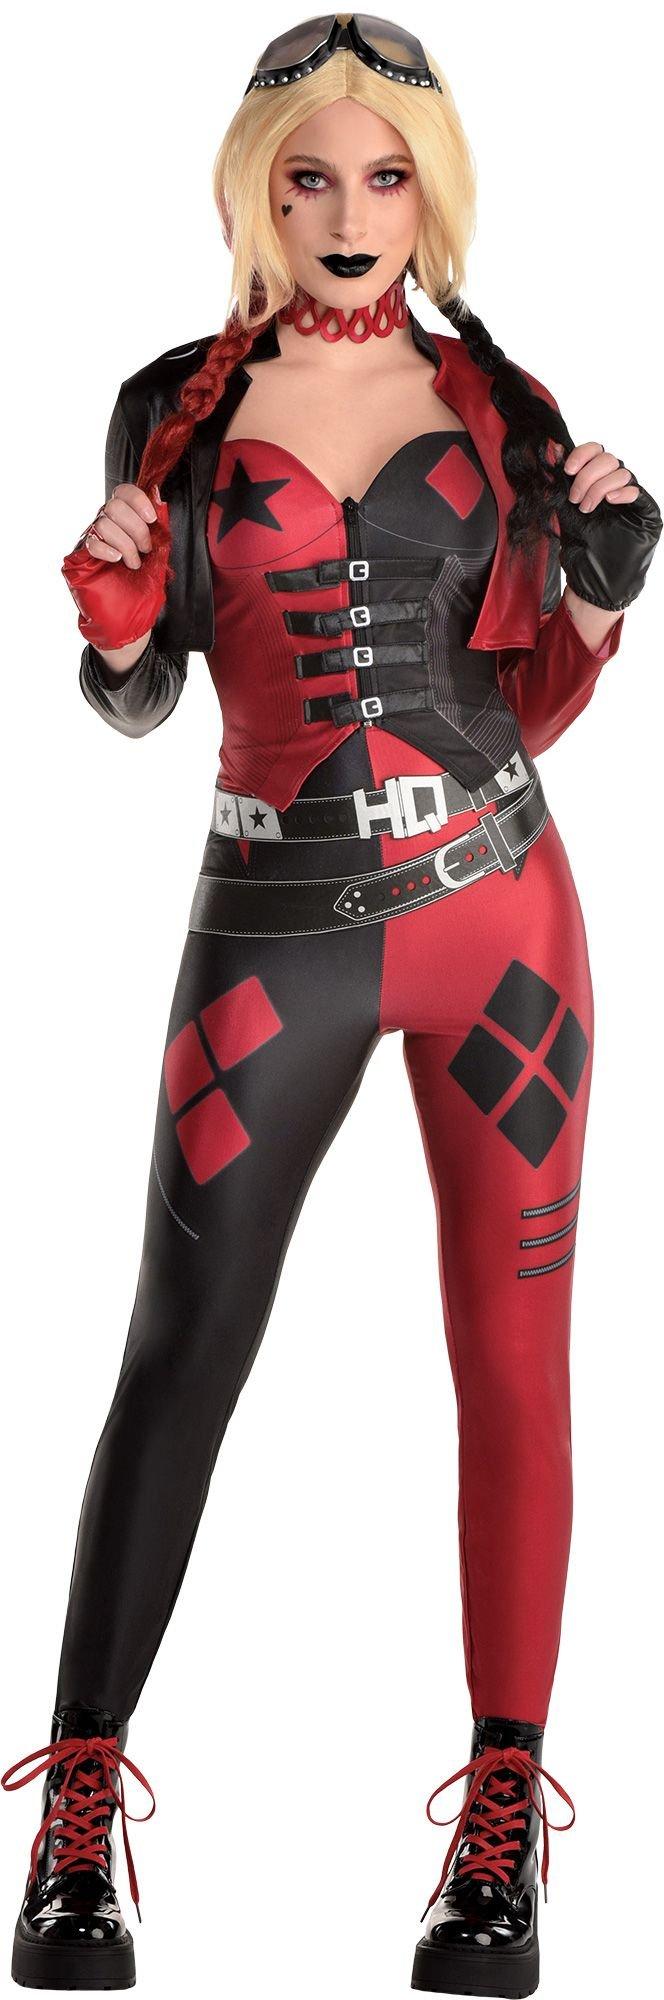 Adult Harley Quinn Deluxe Costume - Suicide Squad 2 | Party City